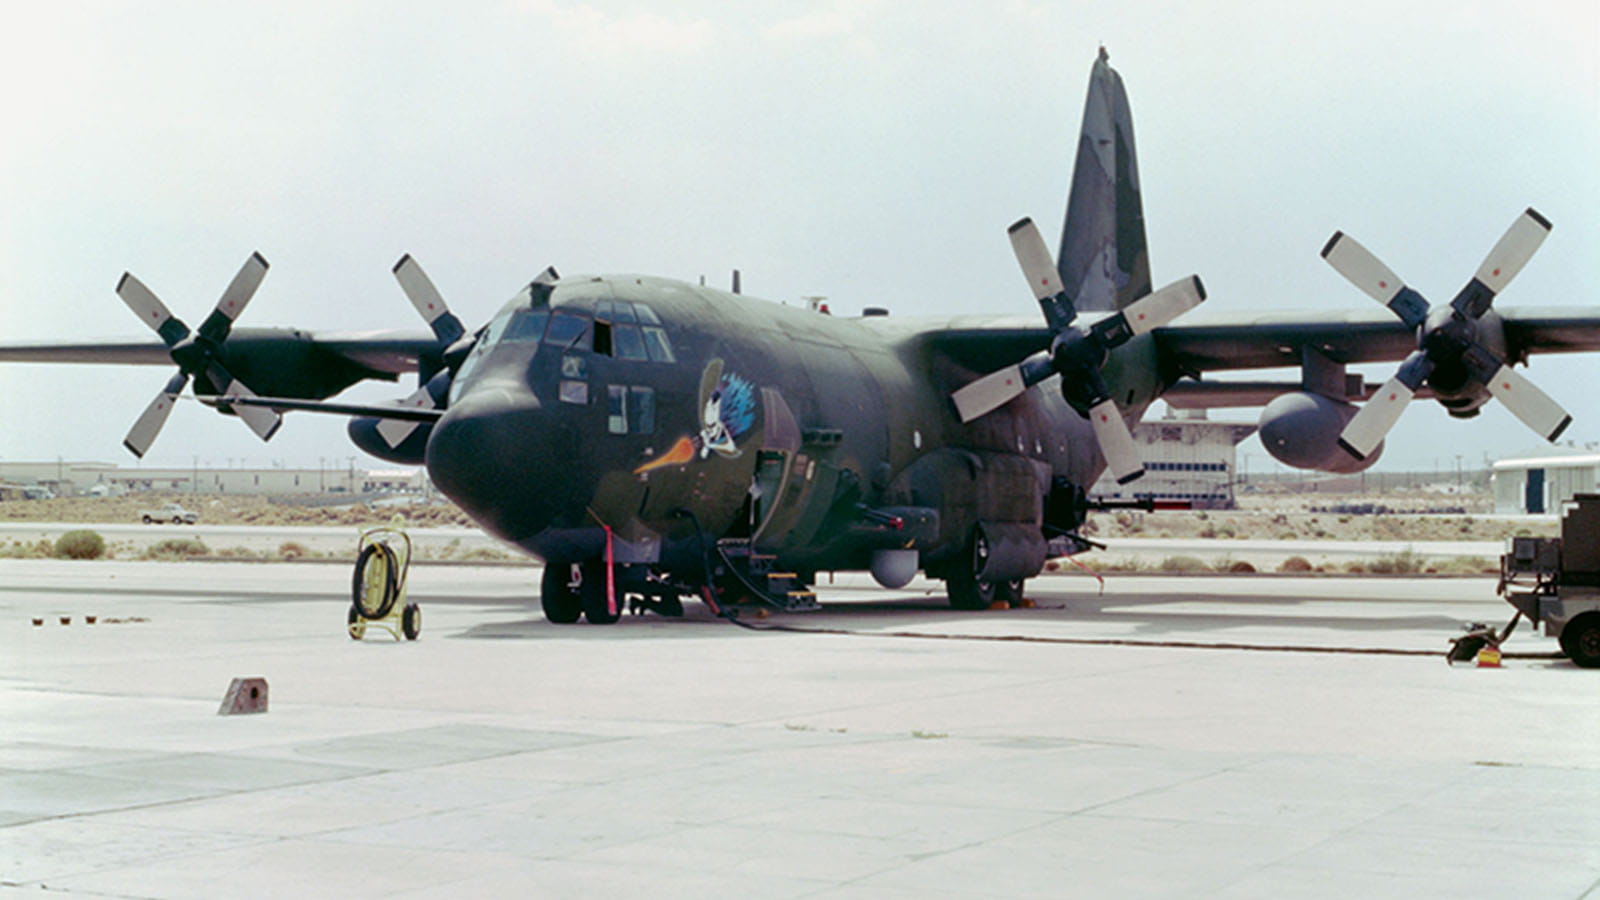 The AC-130 gunship uses the APQ-180 radar system adapted from the APG-70.